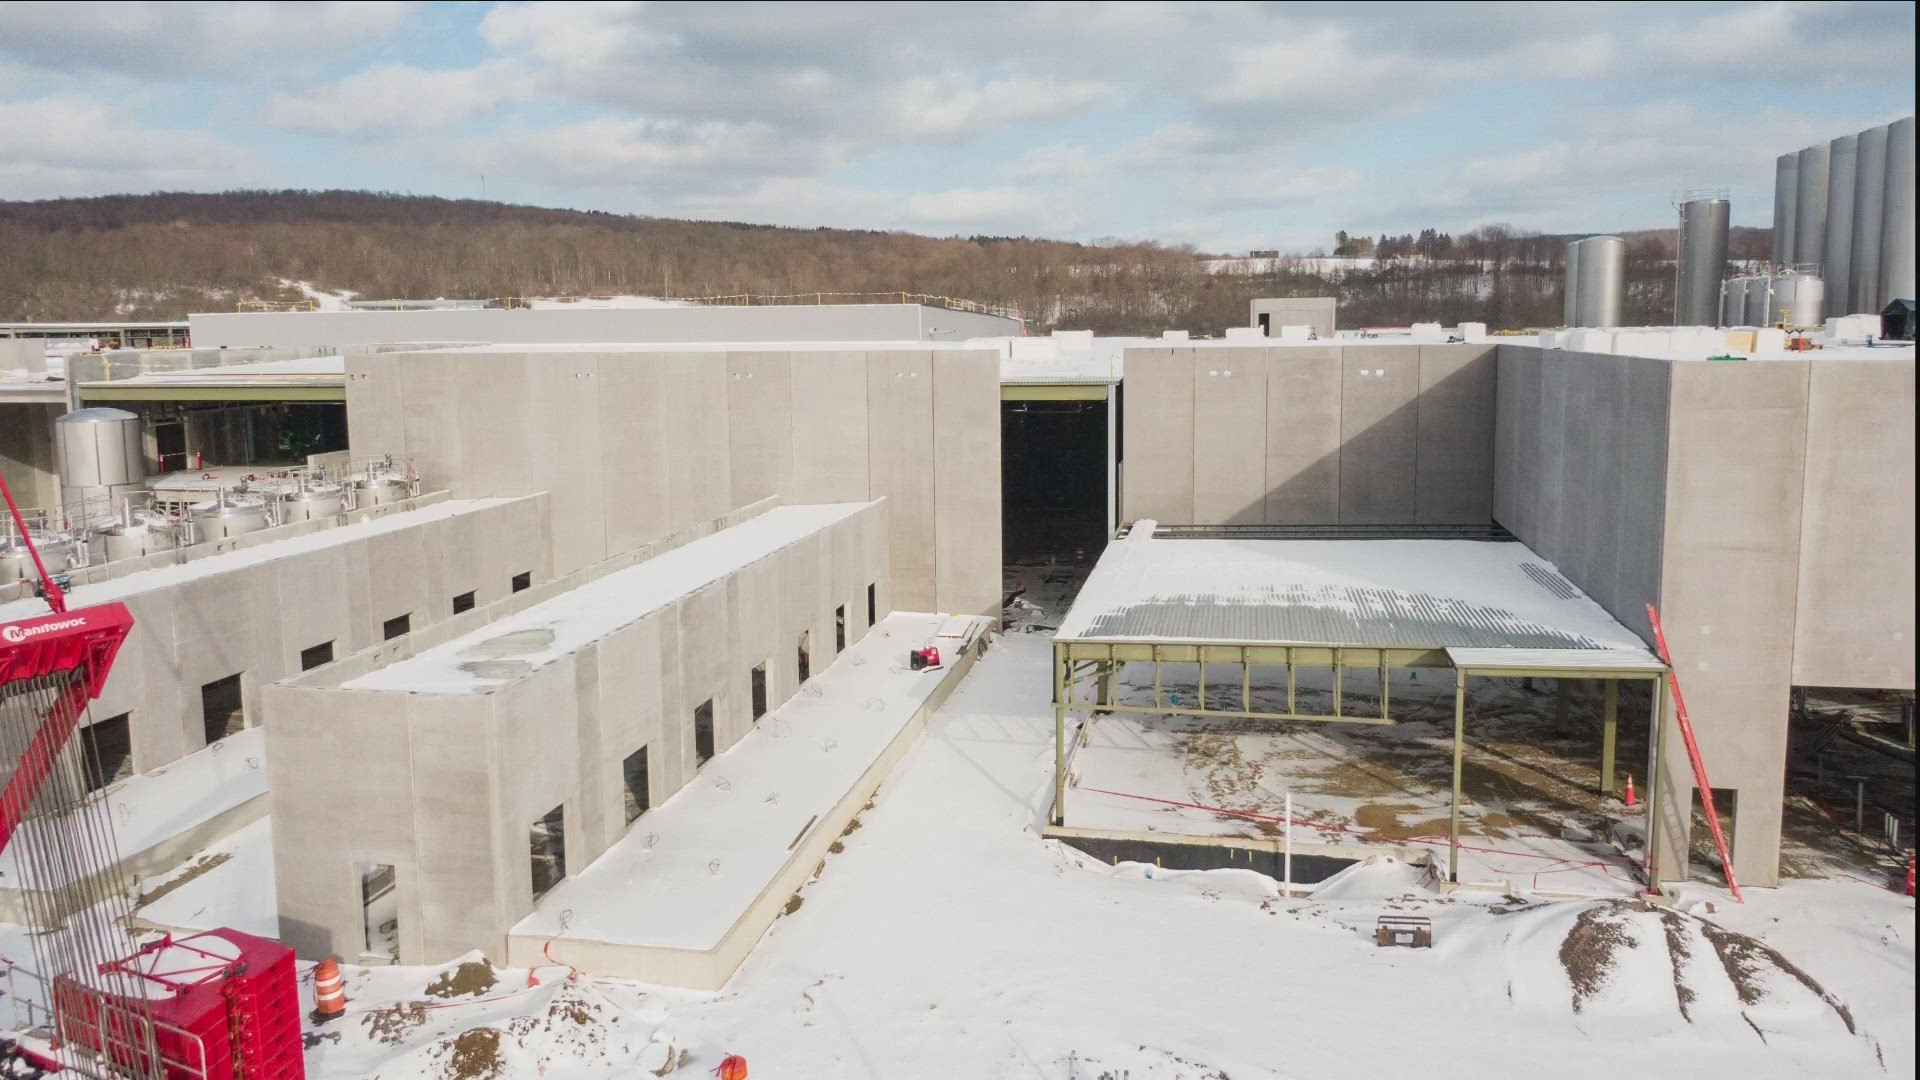 The plant should be ready by early 2024. It will replace an aging facility in the Allegany County Town of Belvidere, where 230 people are employed.